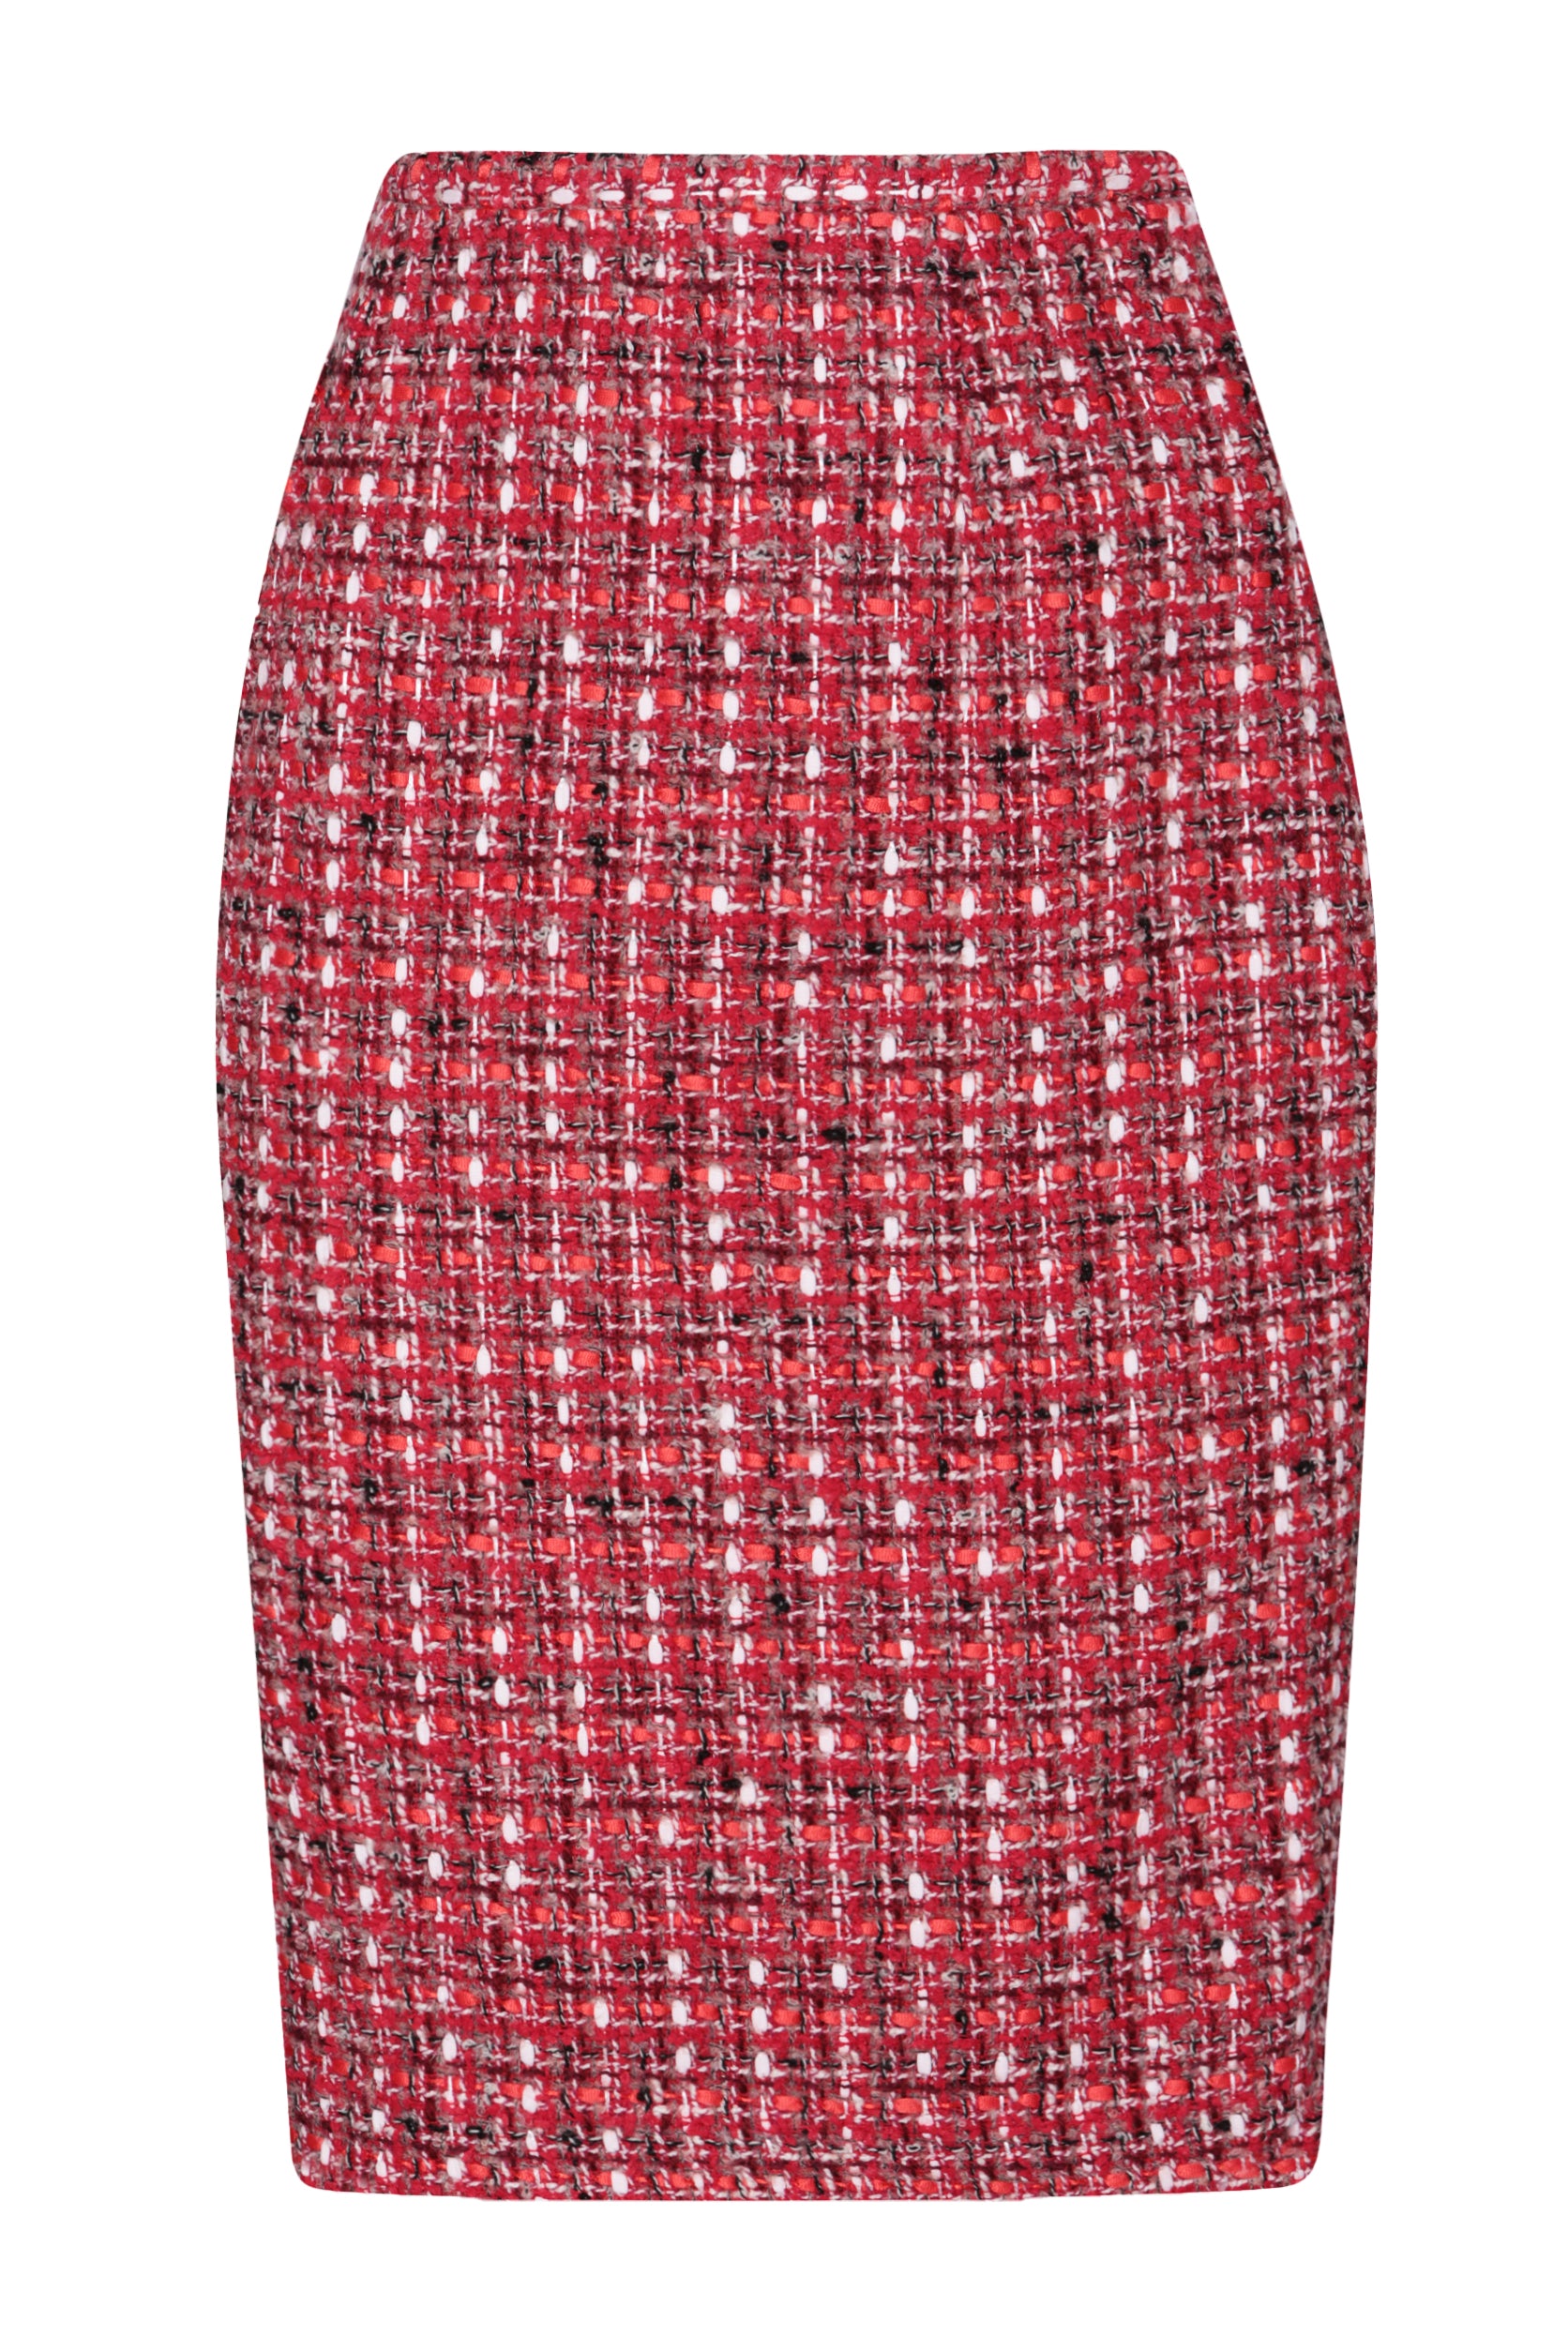 Red/Taupe/White Tweed Pencil-Line Skirt - Penny